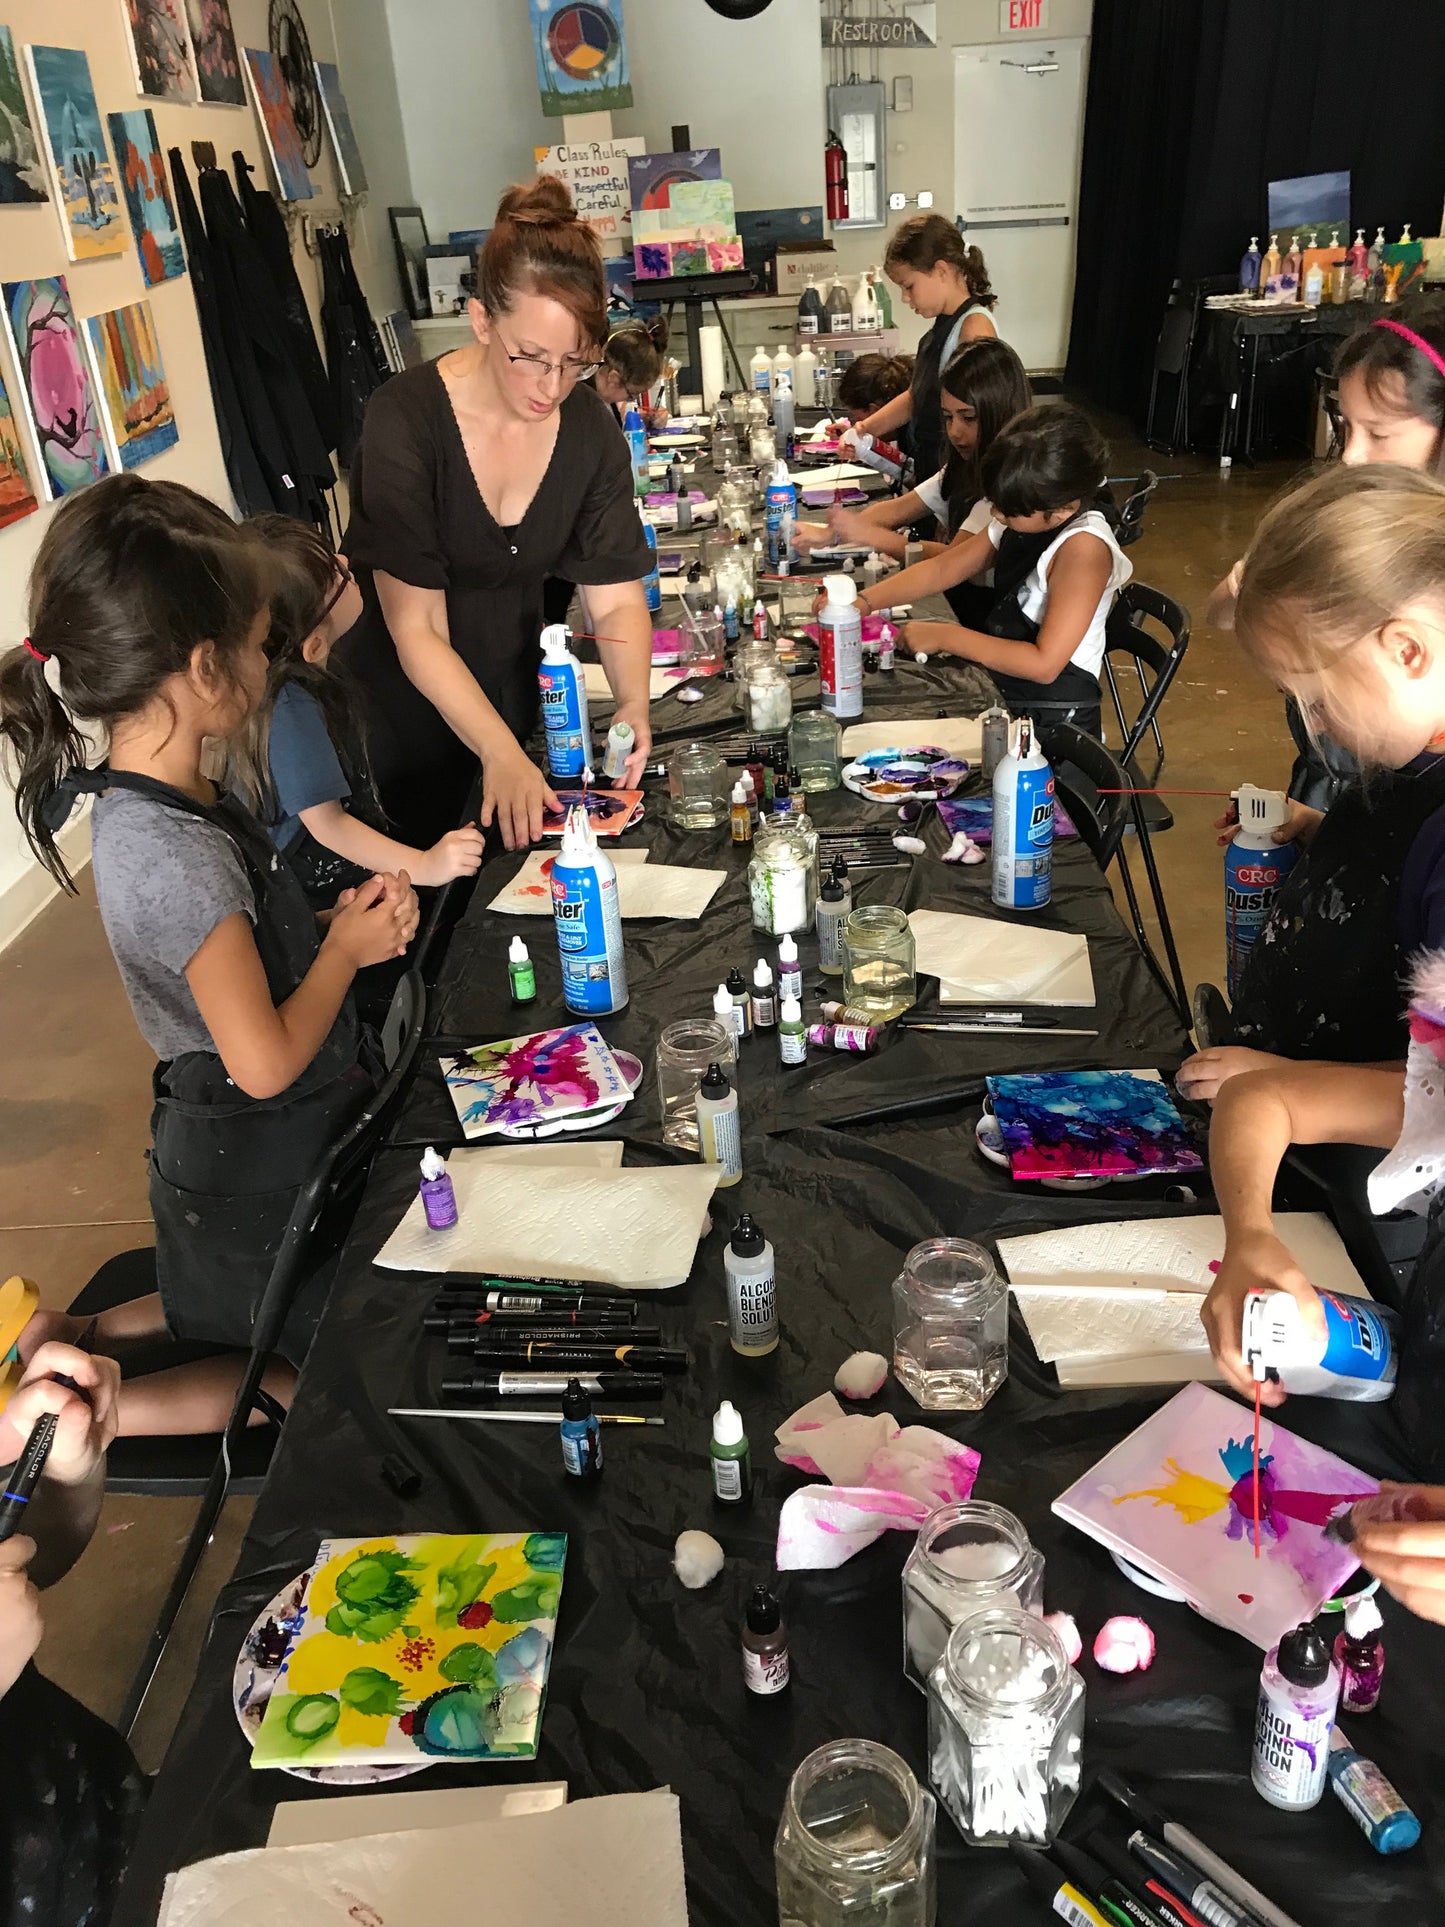 Fri, Feb 24th, 4:30-6:30P “Alcohol Inks” Private Kids Painting Party